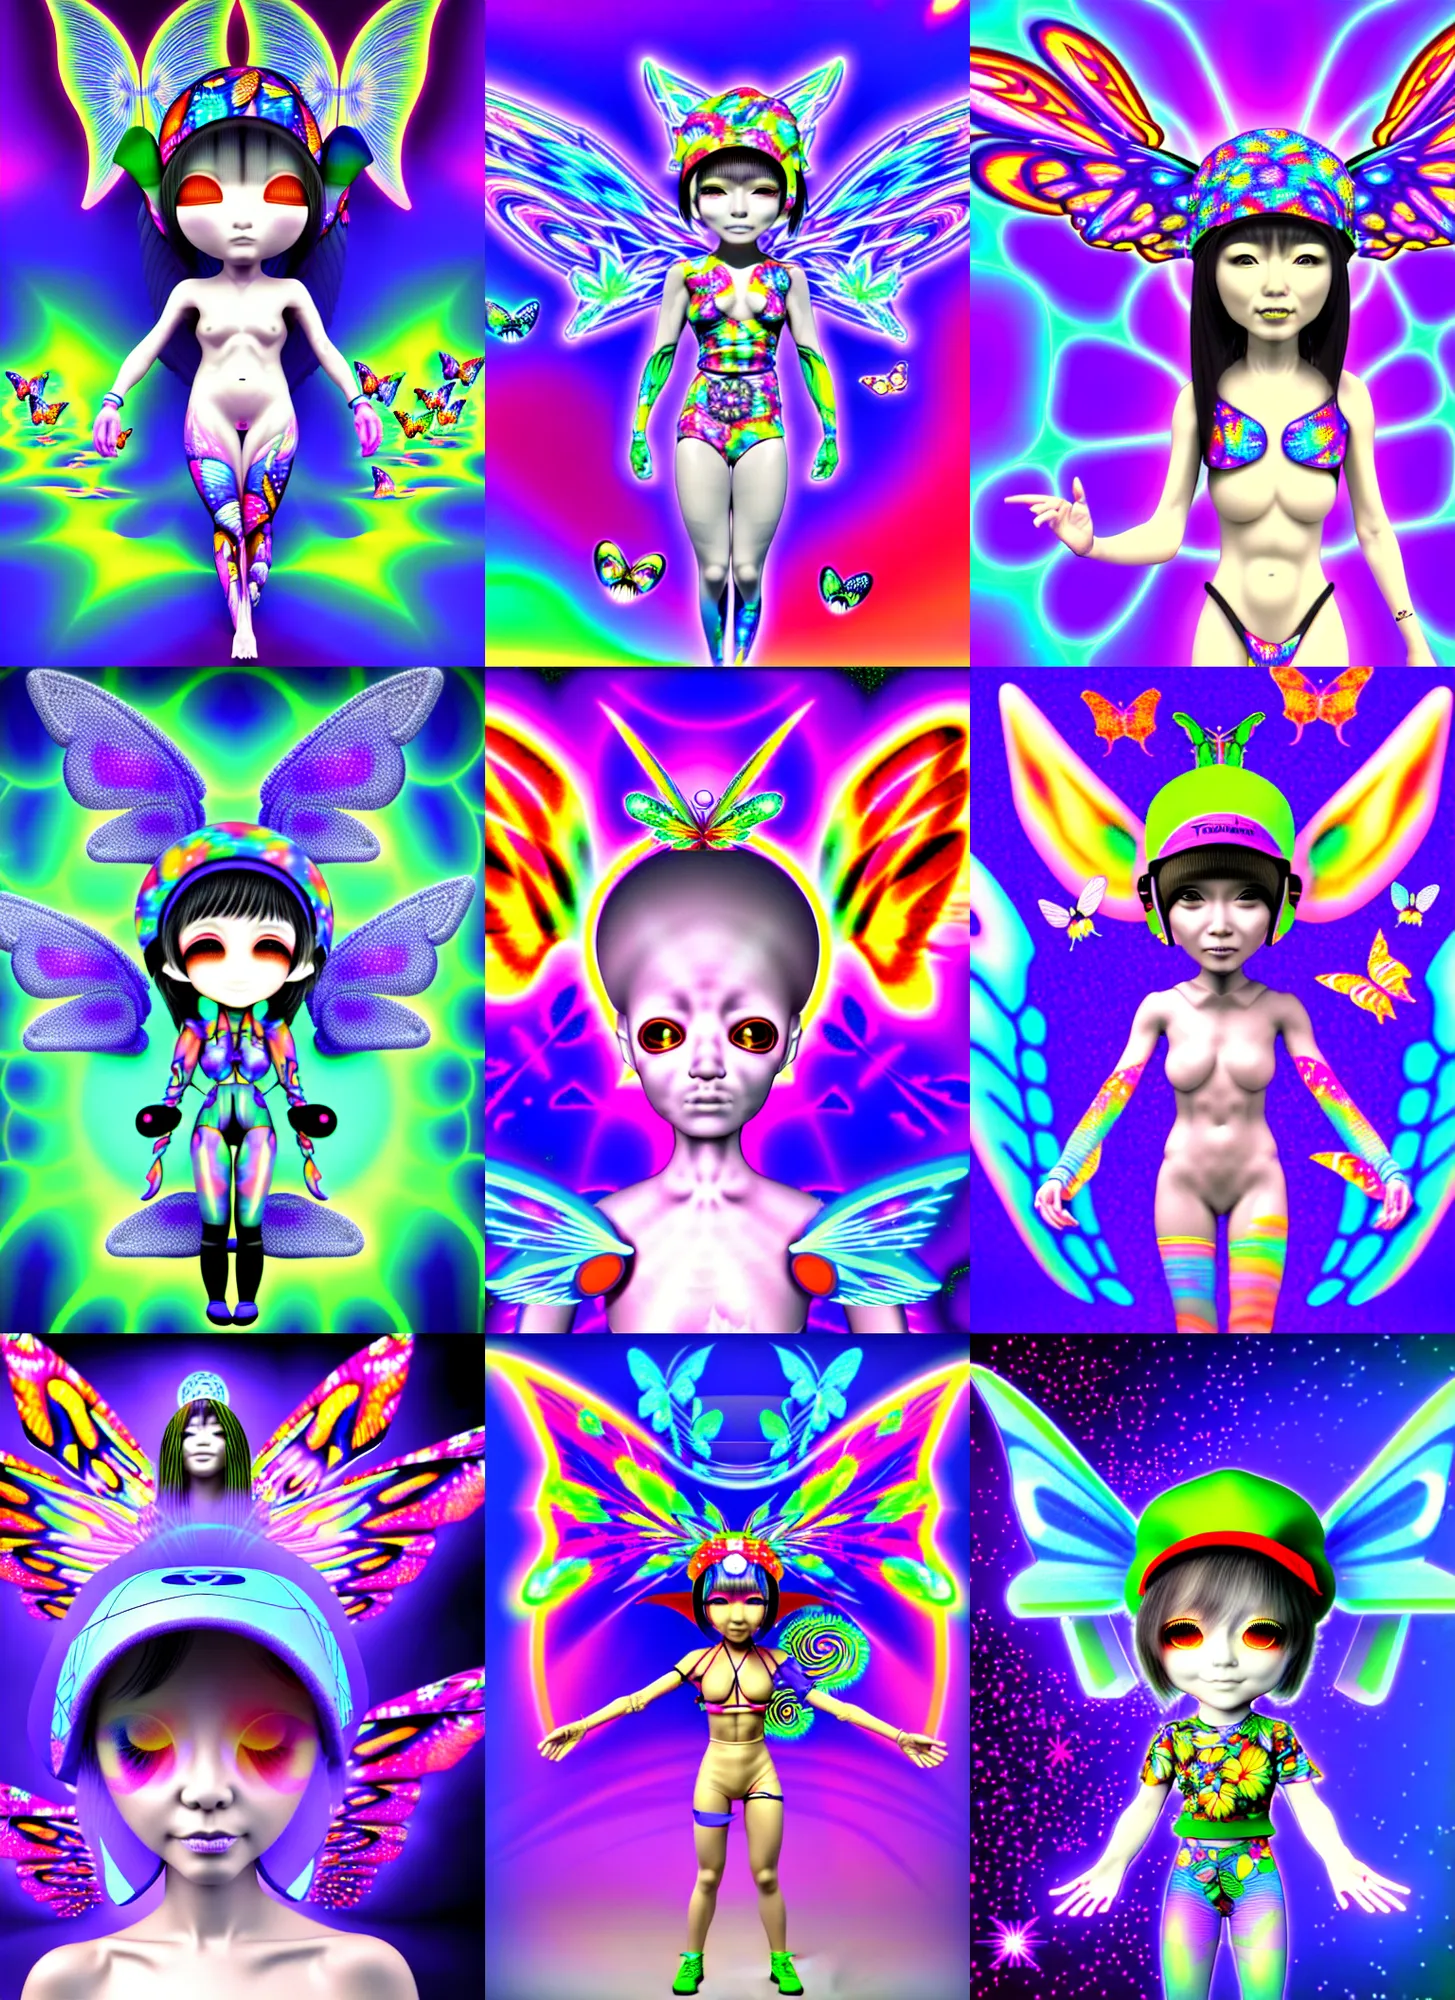 Prompt: lightwave silicon graphics render by ichiro tanida of chibi cyborg wearing a jester cap and wearing angel wings against a psychedelic acid background with rendered butterflies and maya rendered flowers in the style of early three dimensional computer graphics, sgi iris graphics